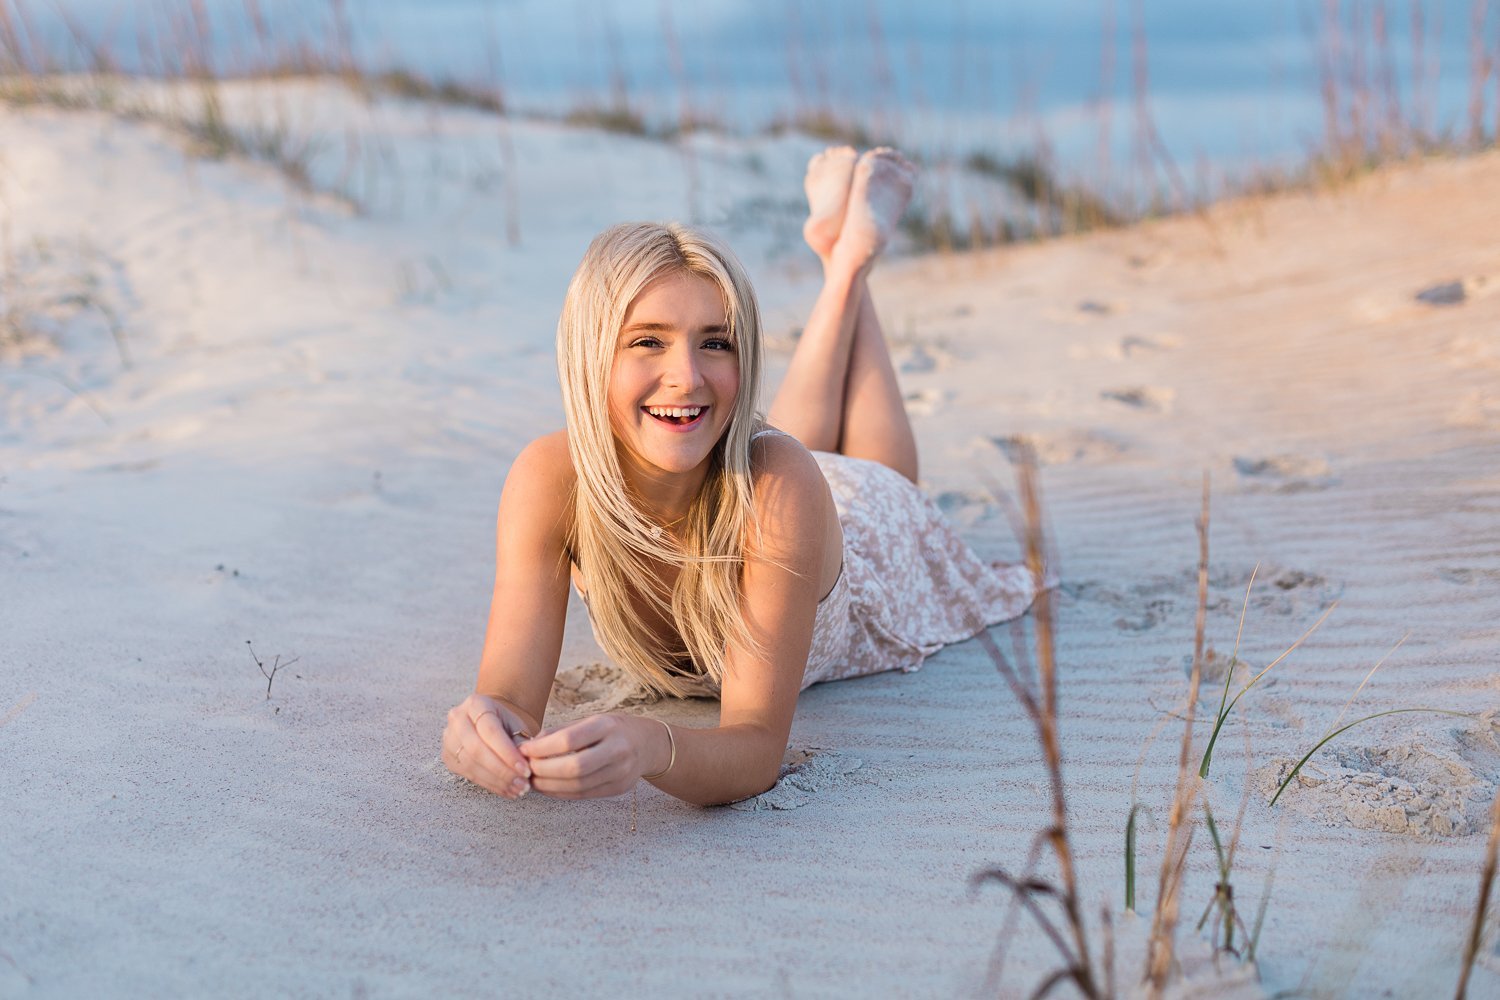 Best beaches in Northeast Florida for a photoshoot